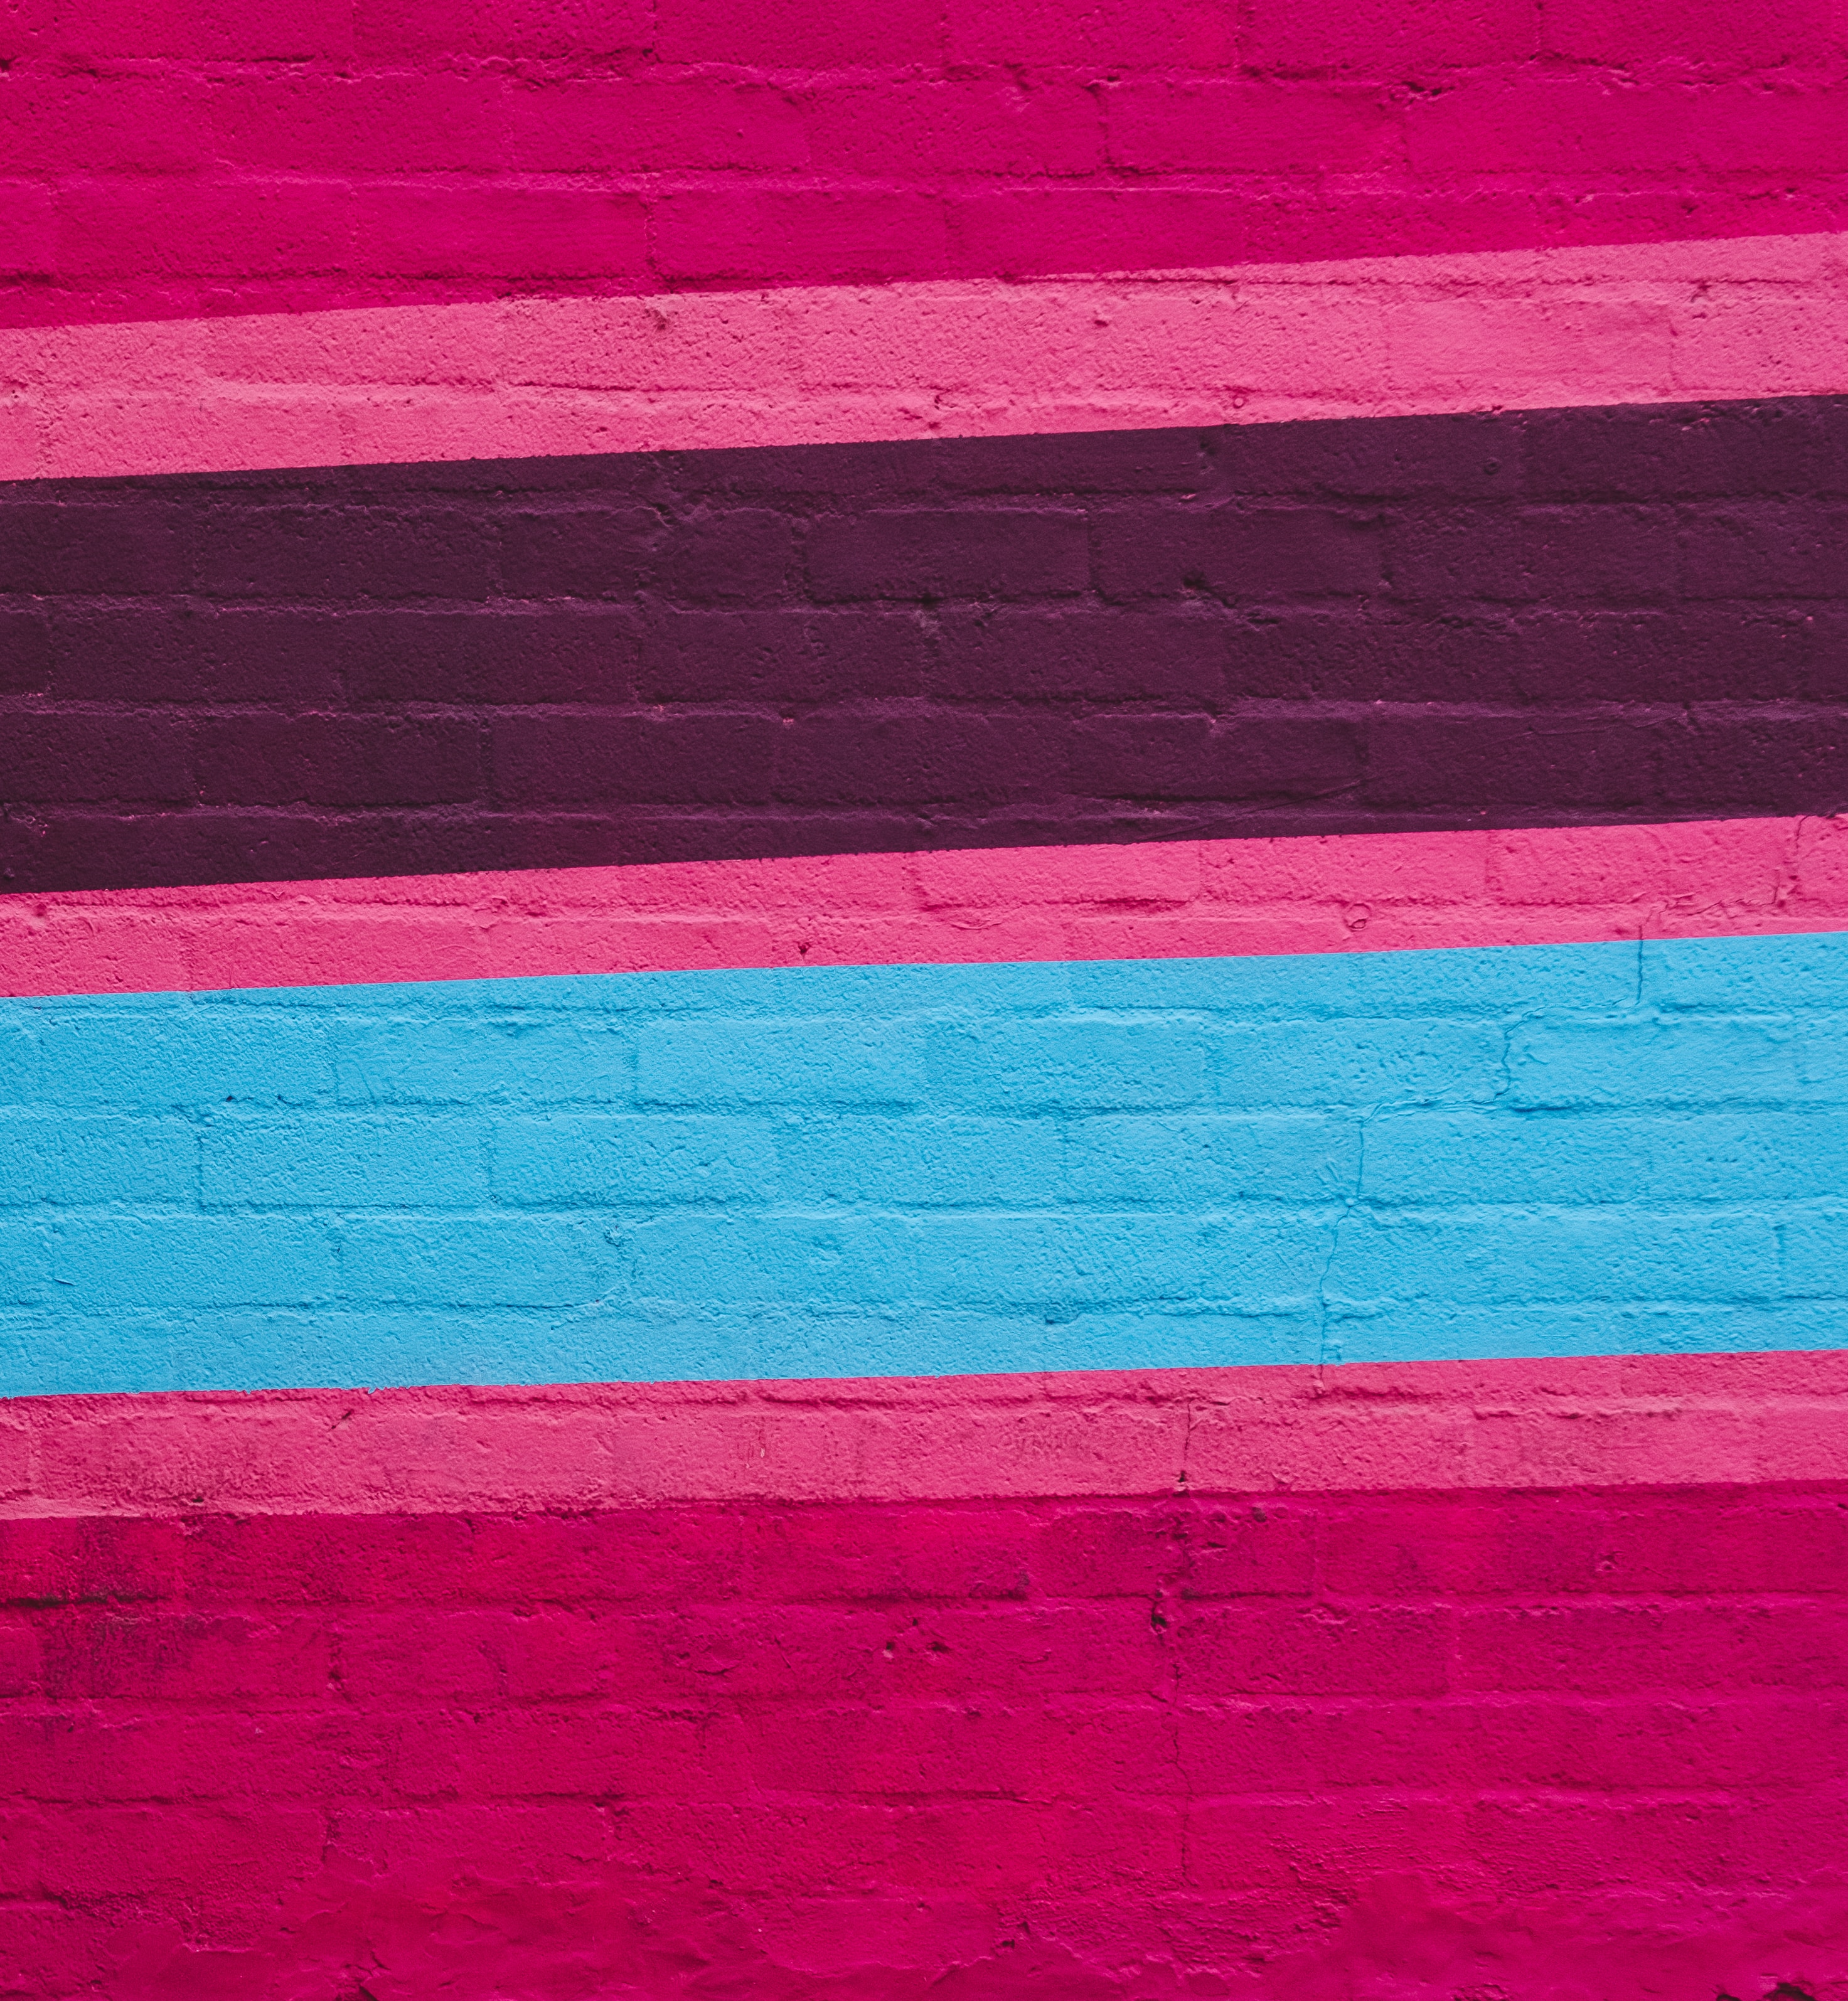 motley, stripes, multicolored, texture, textures, paint, wall, streaks